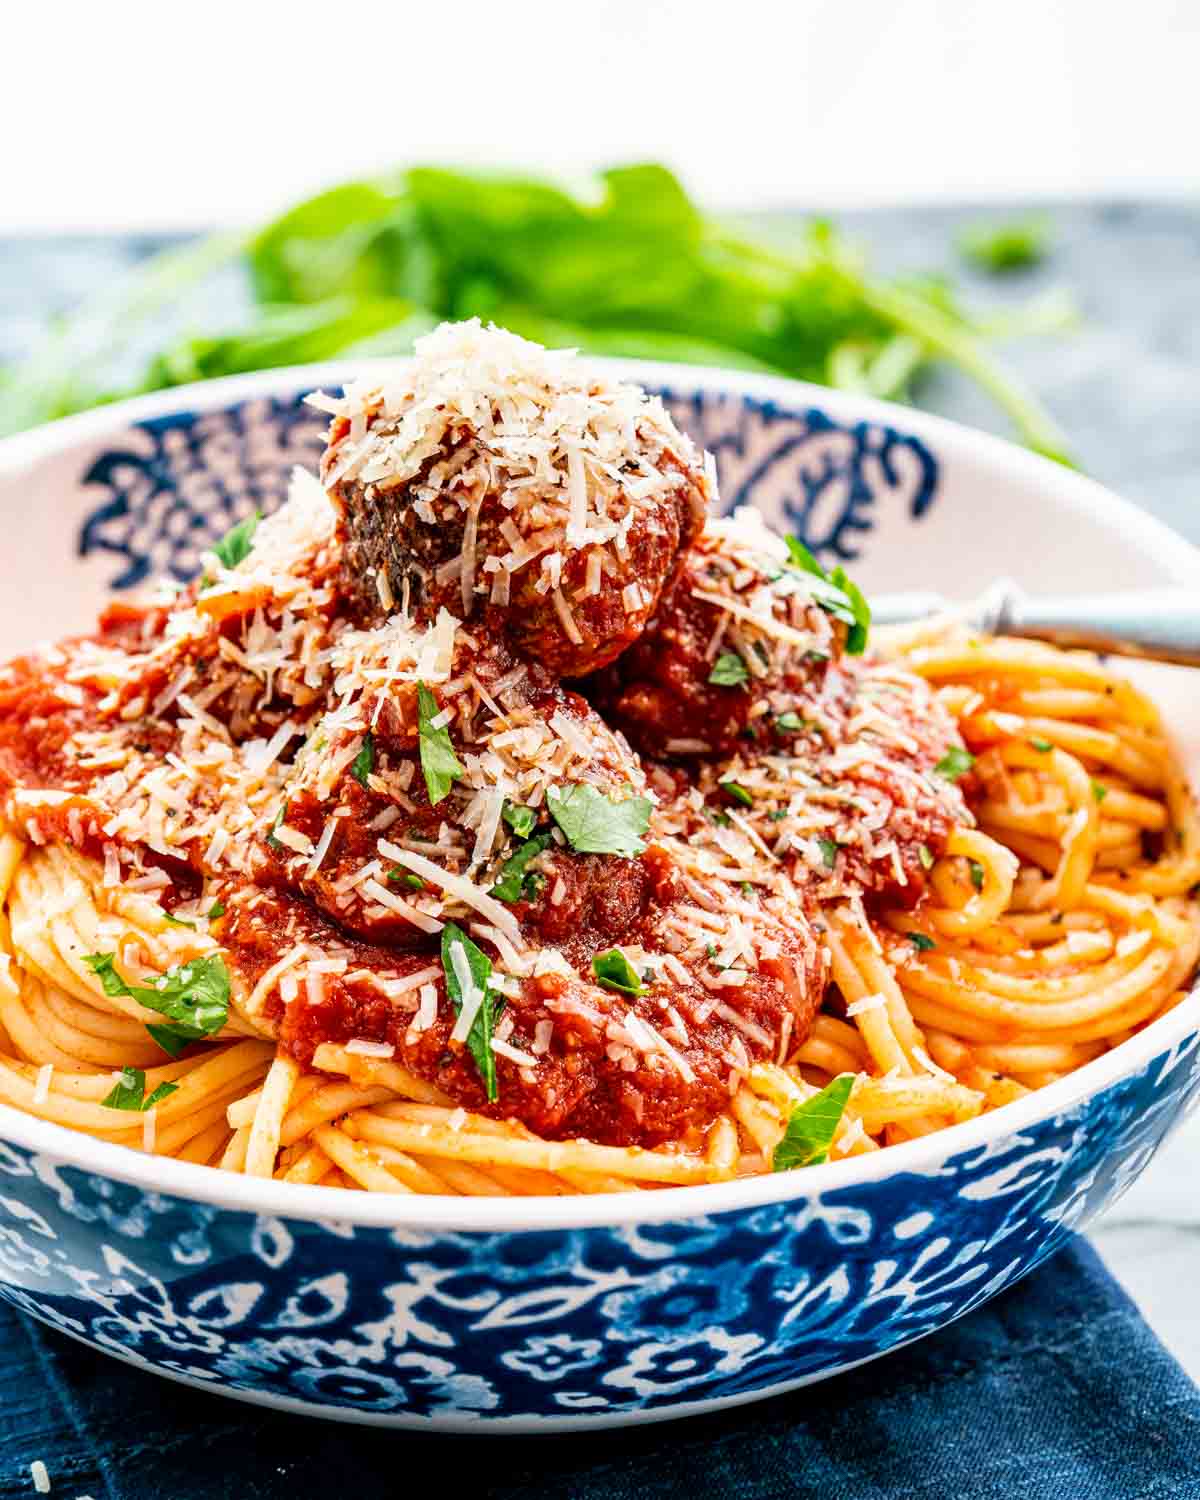 a plated loaded with freshly made spaghetti and meatballs and topped with freshly grated parmesan cheese.